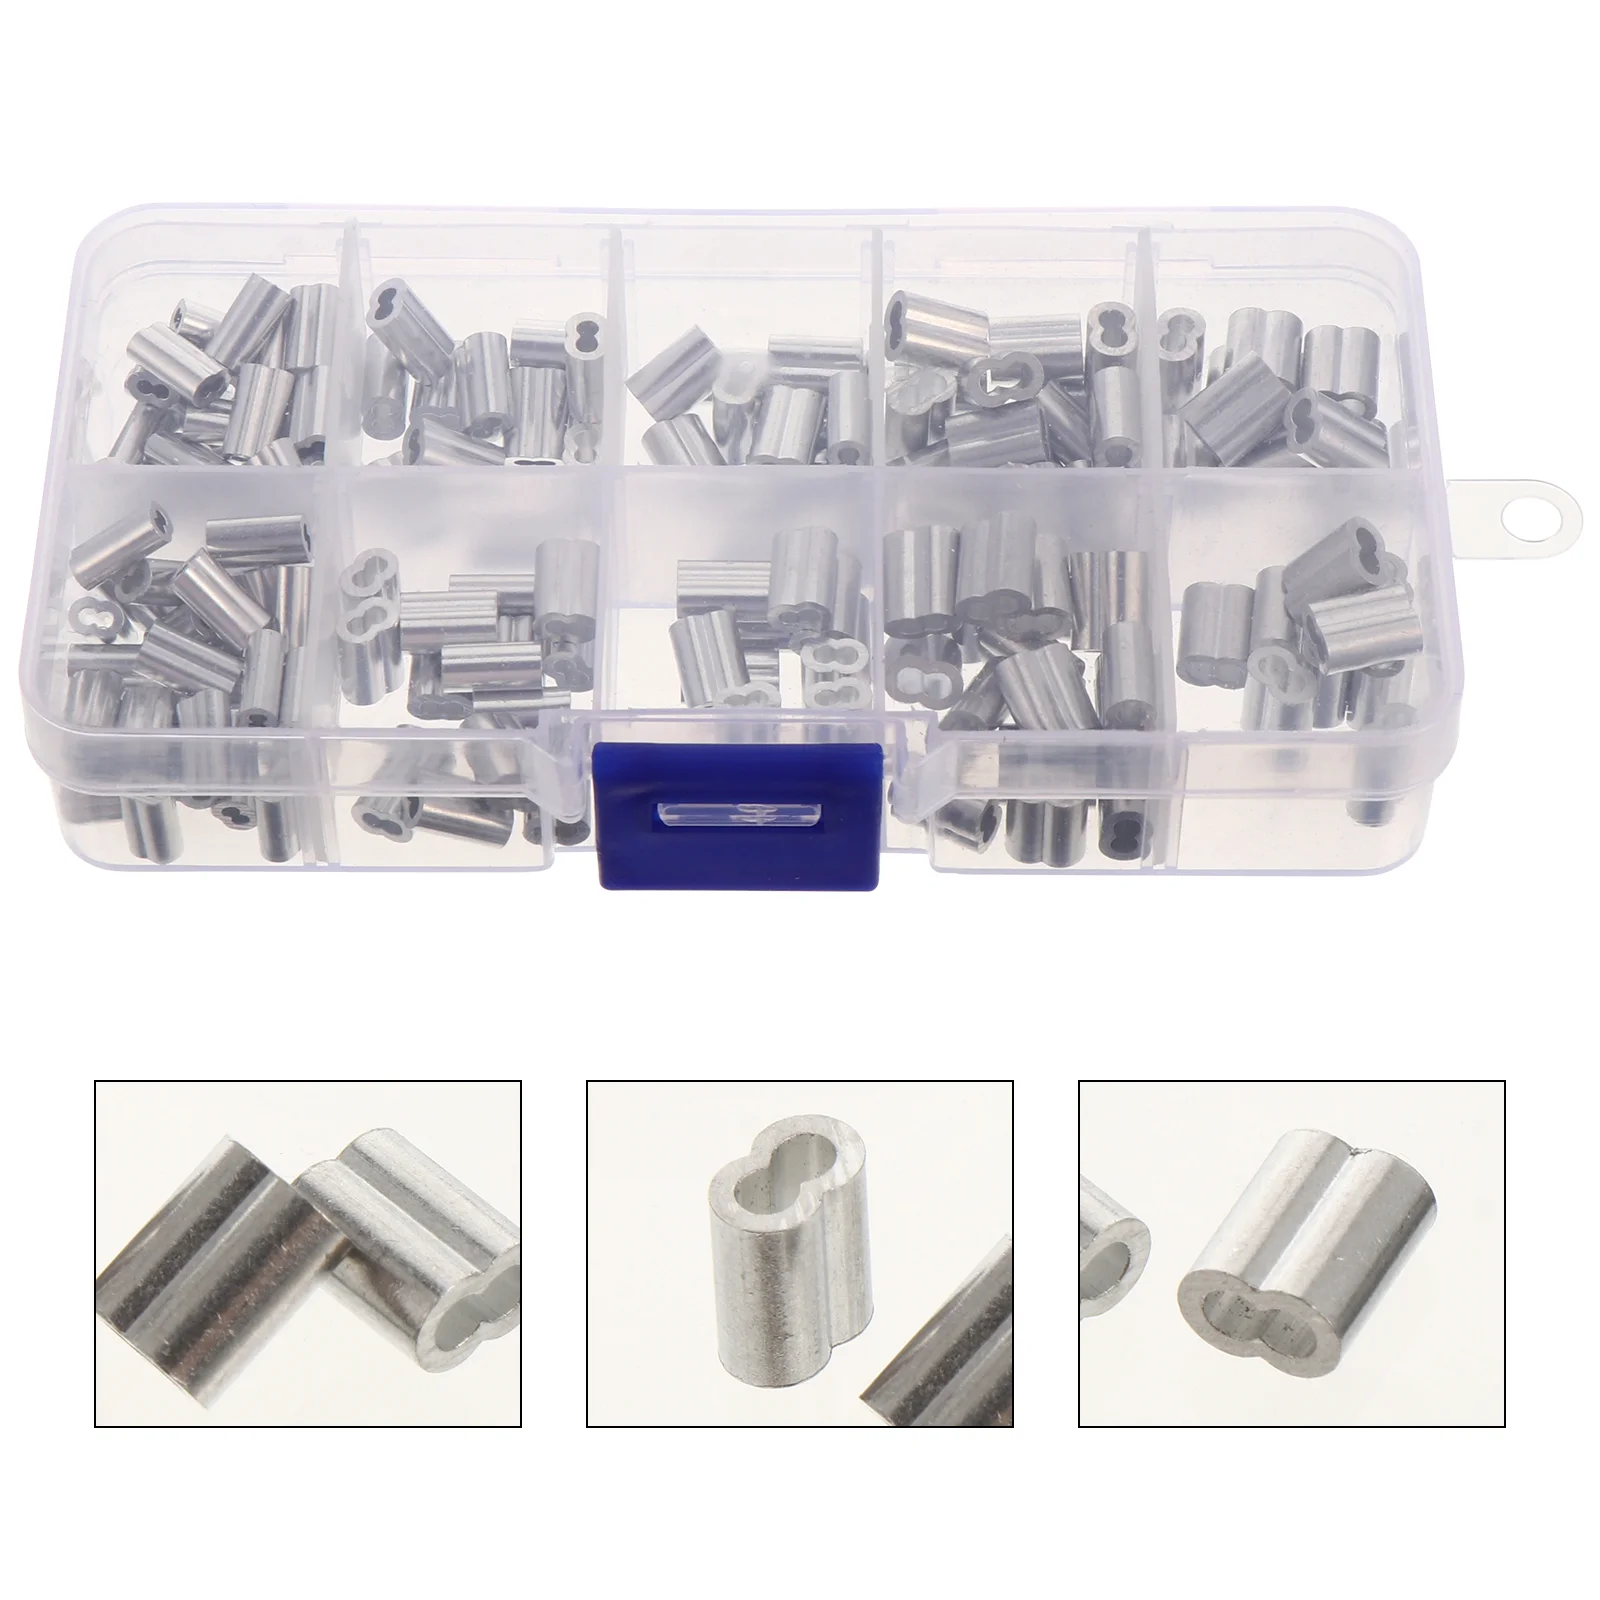 

150 Pcs Fishing Wire 8-shaped Aluminum Sleeve Crimping Loop Sleeves Kit Hardwares Line Connector Accessories